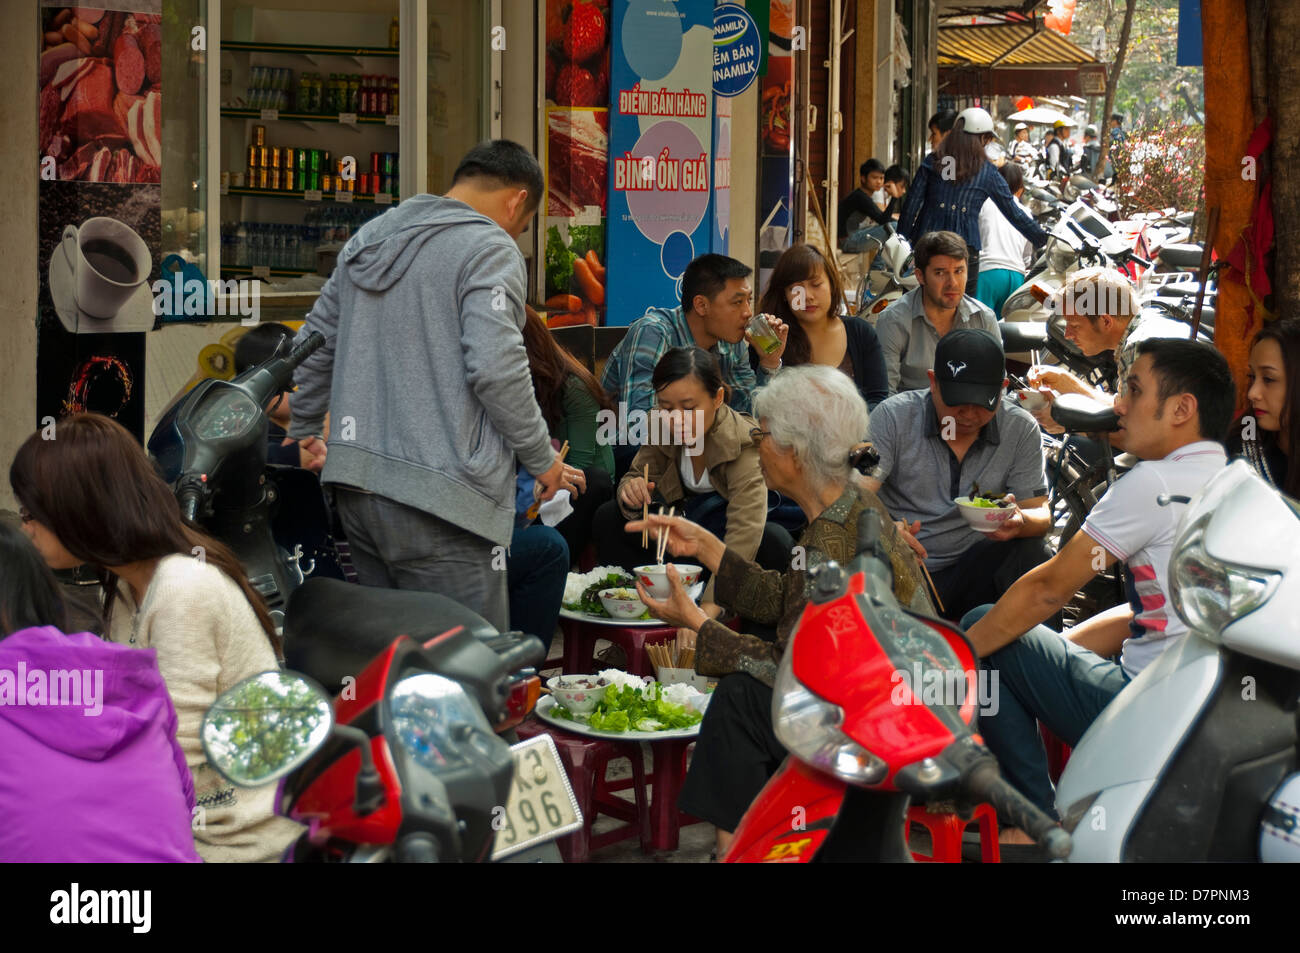 Horizontal view of people sitting in the street eating traditional Pho, noodles, on the pavement in Hanoi. Stock Photo